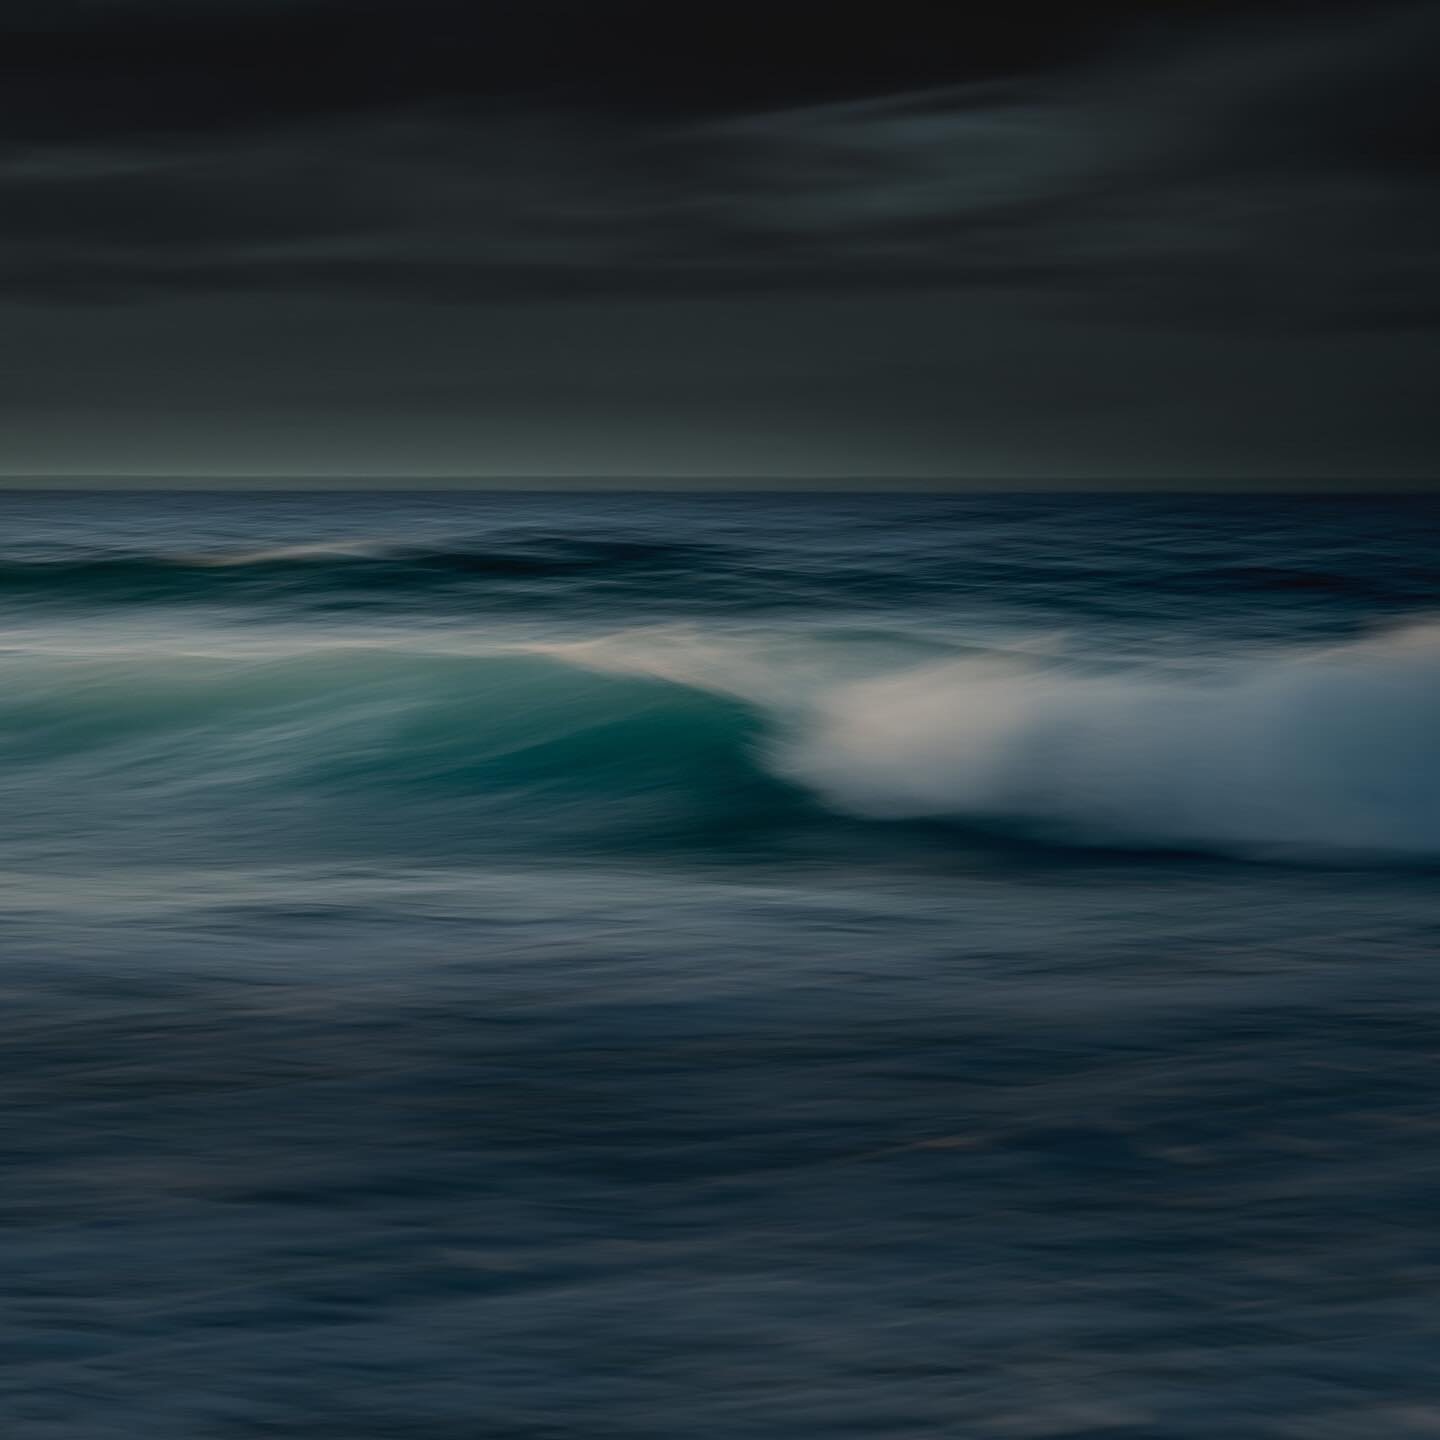 Sometimes a wave, all brooding and blue/grey will rise out of the sea to rage against the shore - nature&rsquo;s poetic manifestation of mood, mystery, energy and timelessness.

#wave #stormclouds #surfphotography #surf #stormsurf #moody #dark #drama